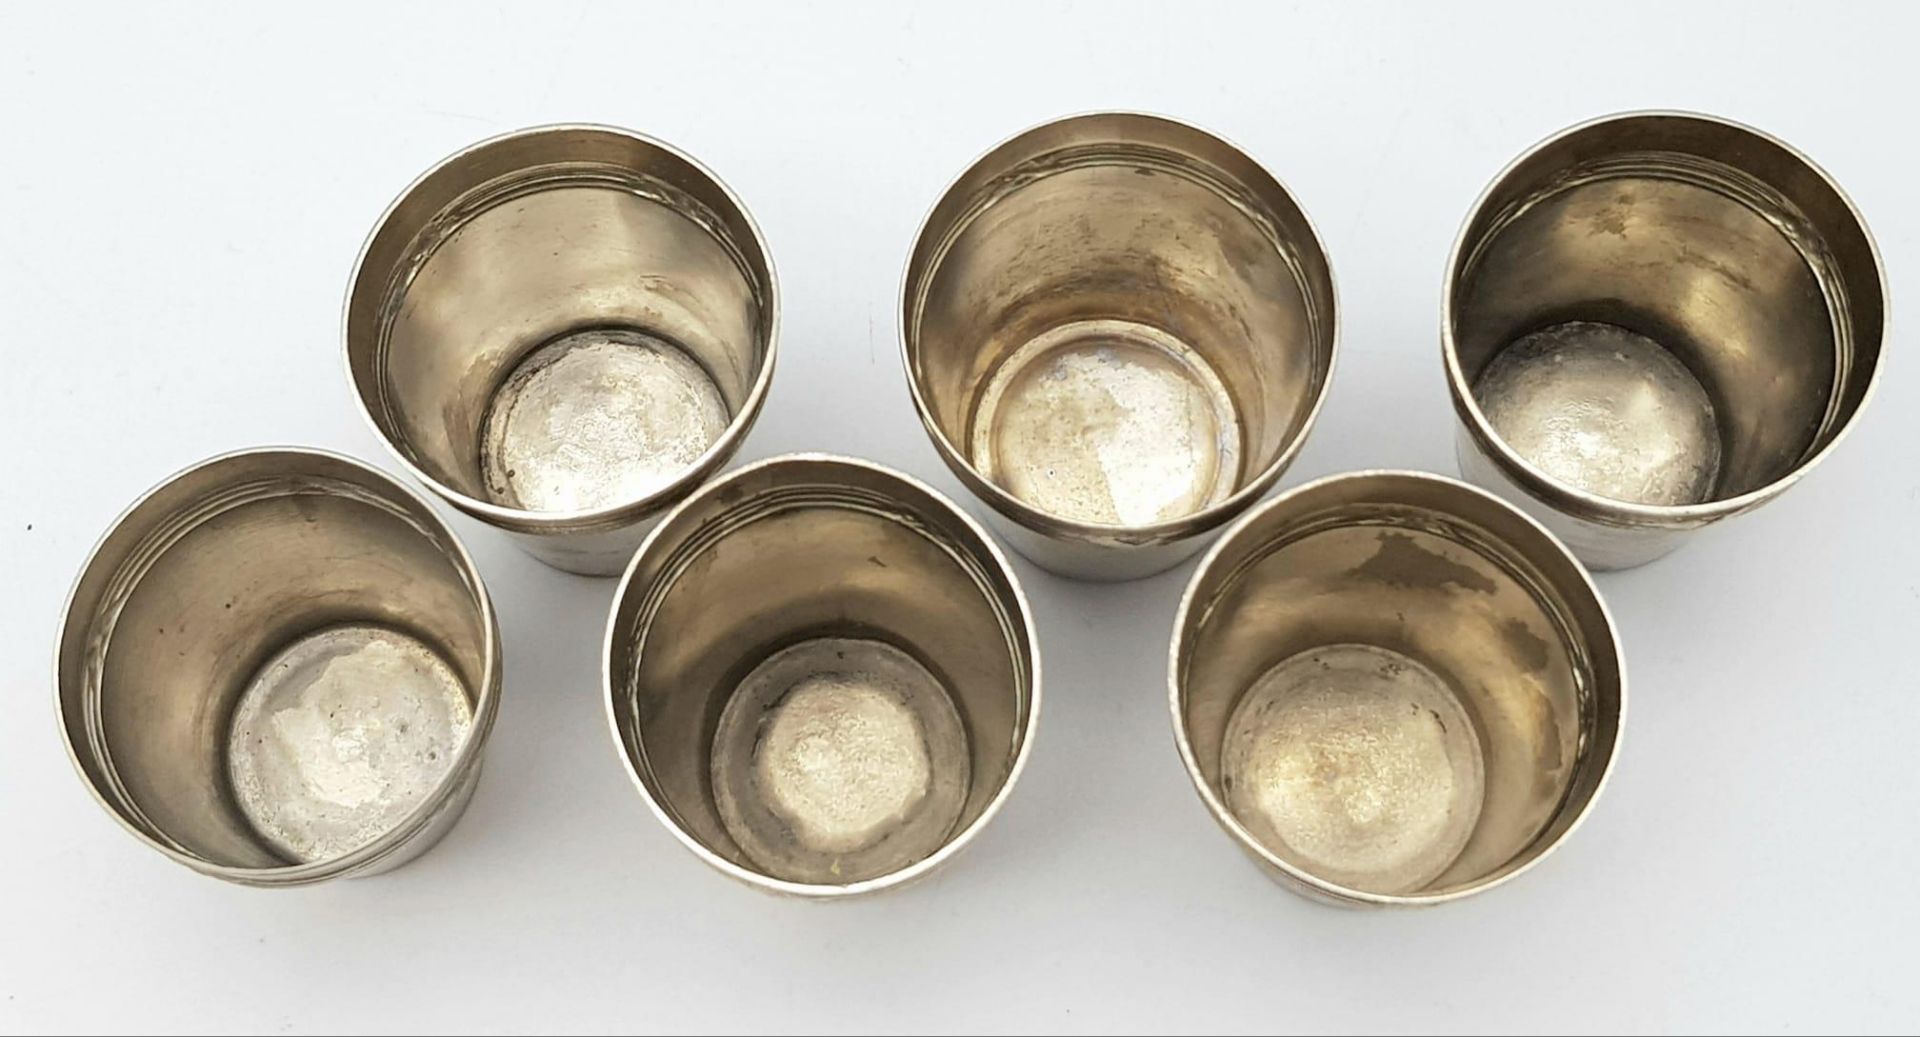 6 x Silver Plated German Gebirgsjäger Division (Mountain Troops) Schnapps Cups. - Image 3 of 5